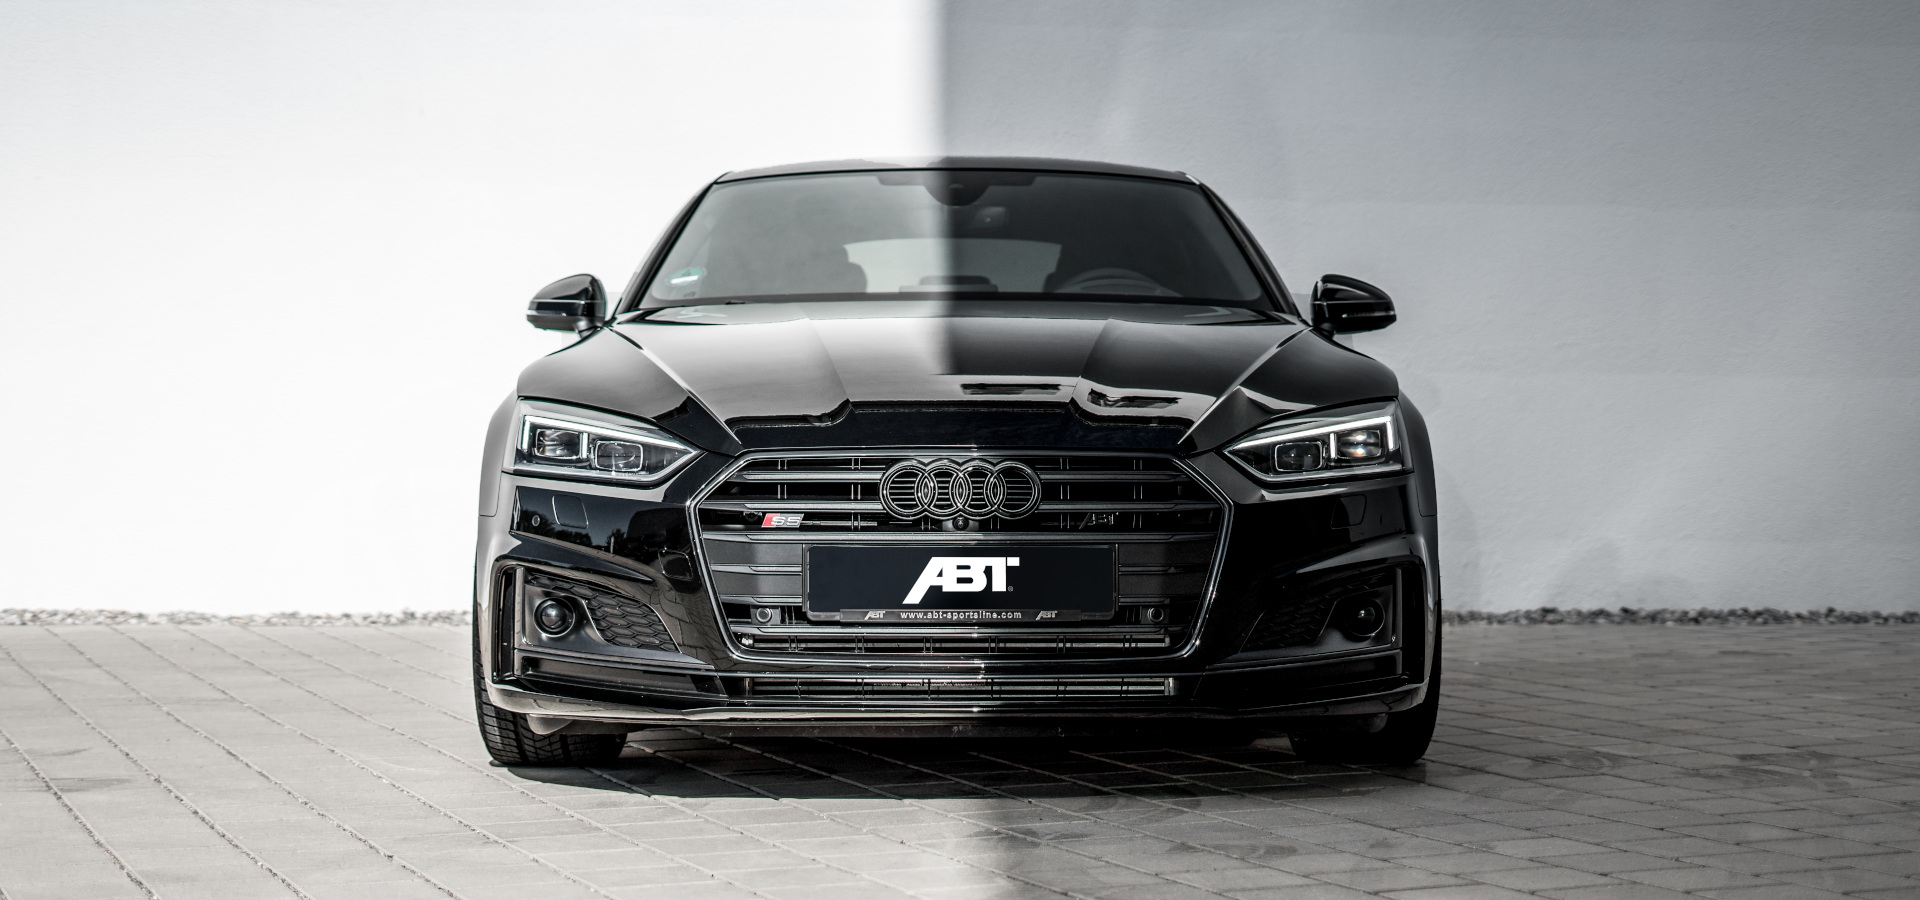 ABT Gives Europe's 2020 Audi S5 Sportback A Diesel Boost To 379 HP